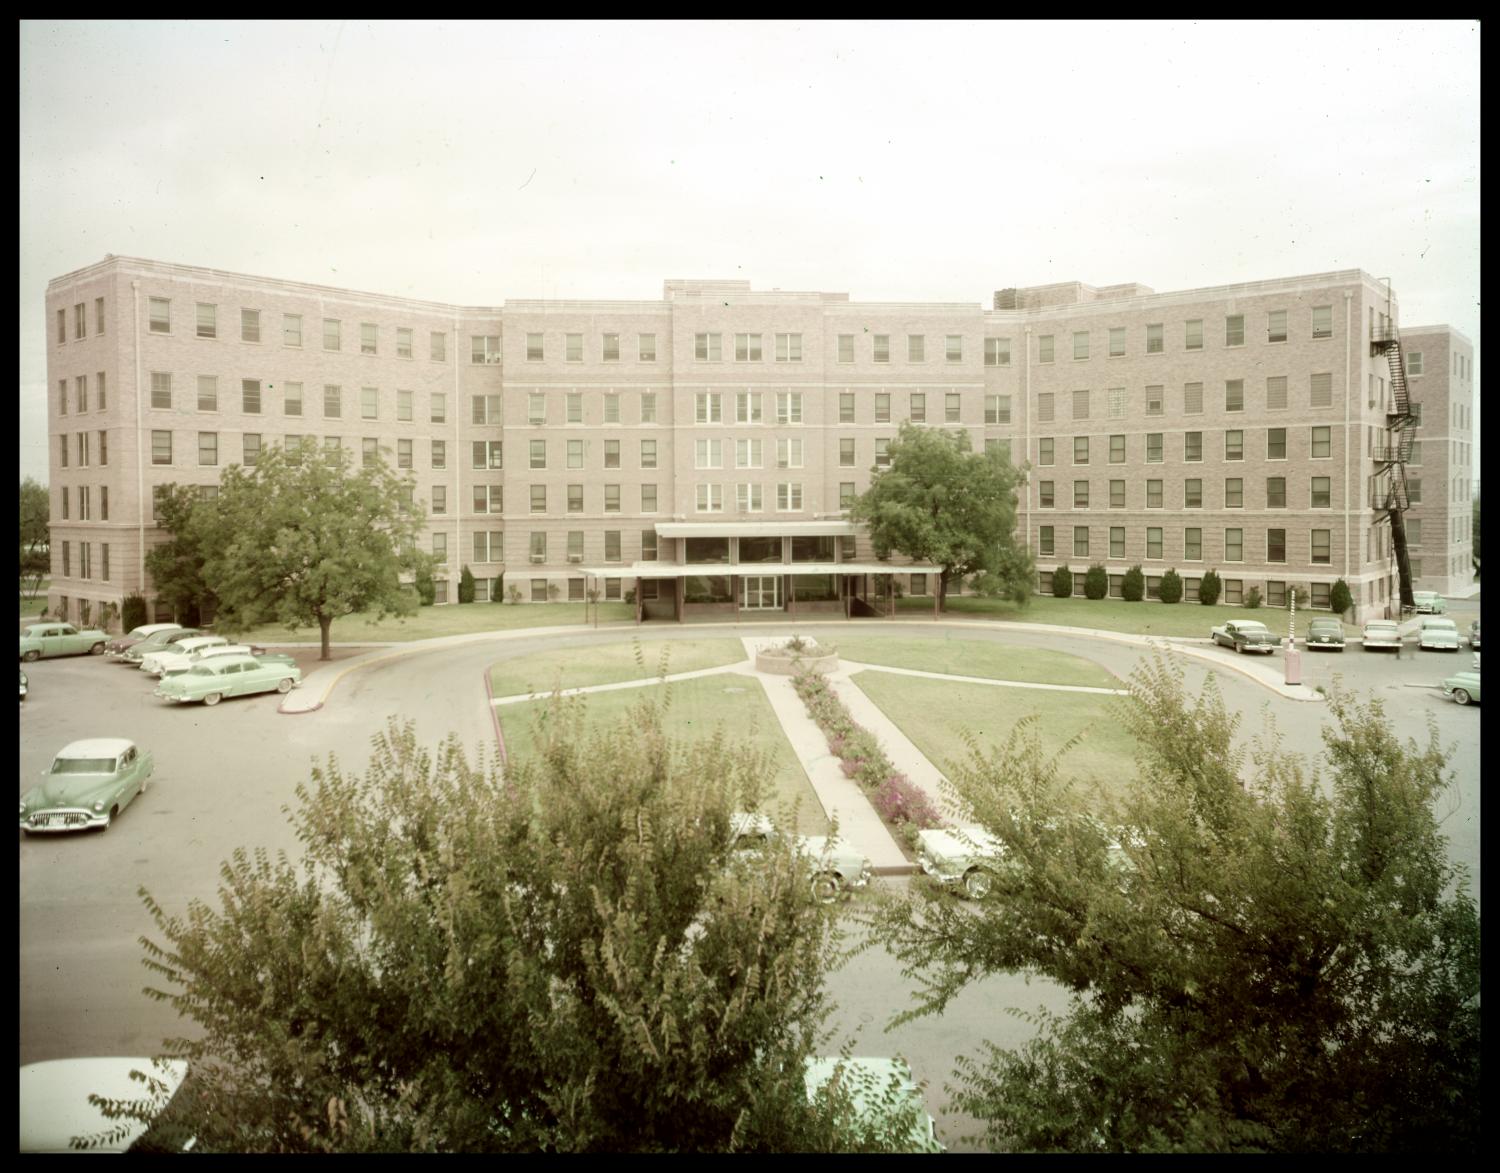 What is the history of Hendrick Medical Center?